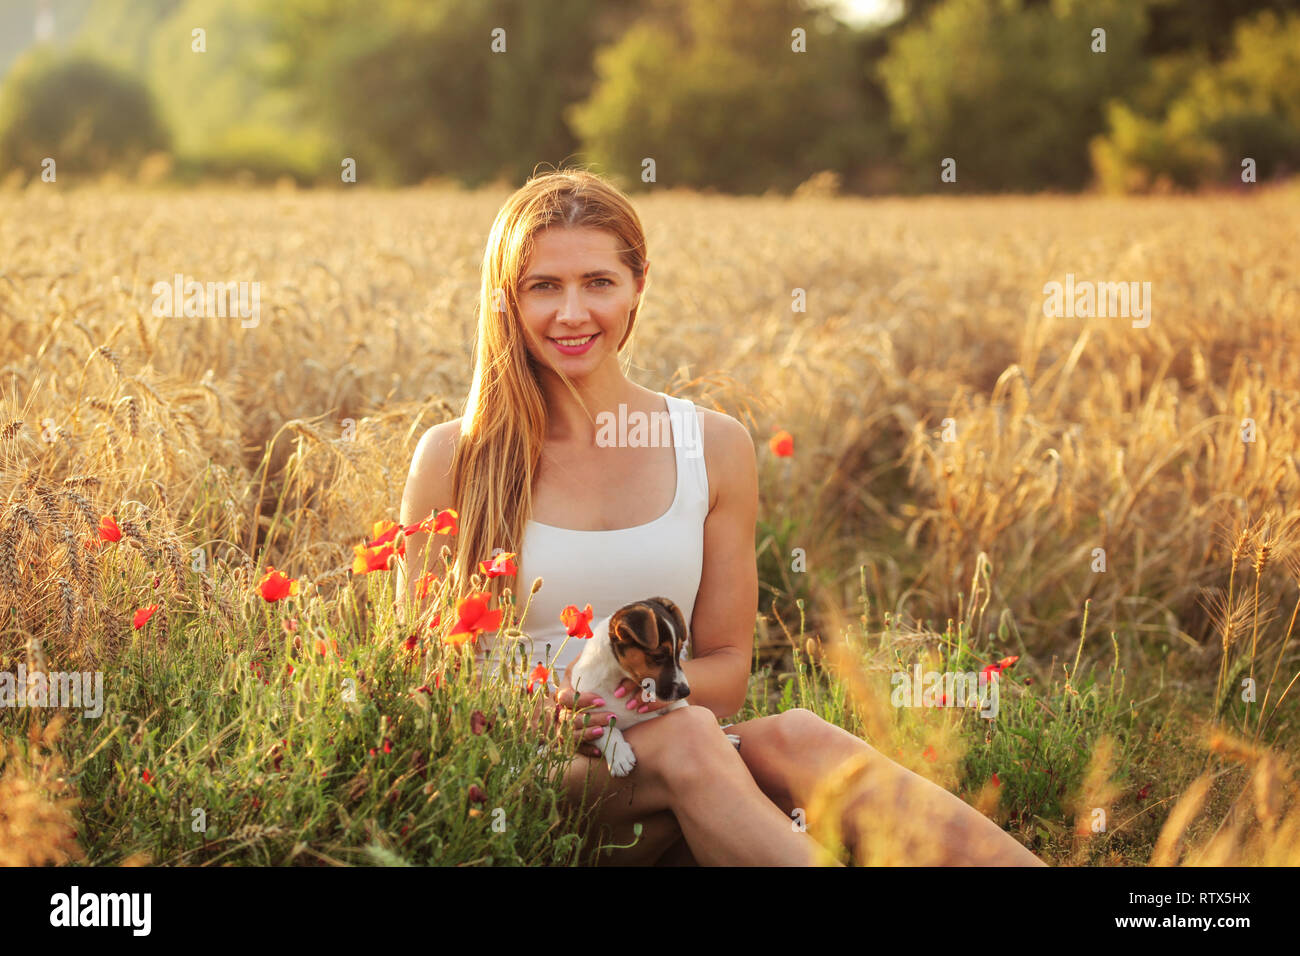 Young woman sitting with Jack Russell terrier puppy on her lap, afternoon sun lit wheat field in background, red poppy flowers next to her. Stock Photo